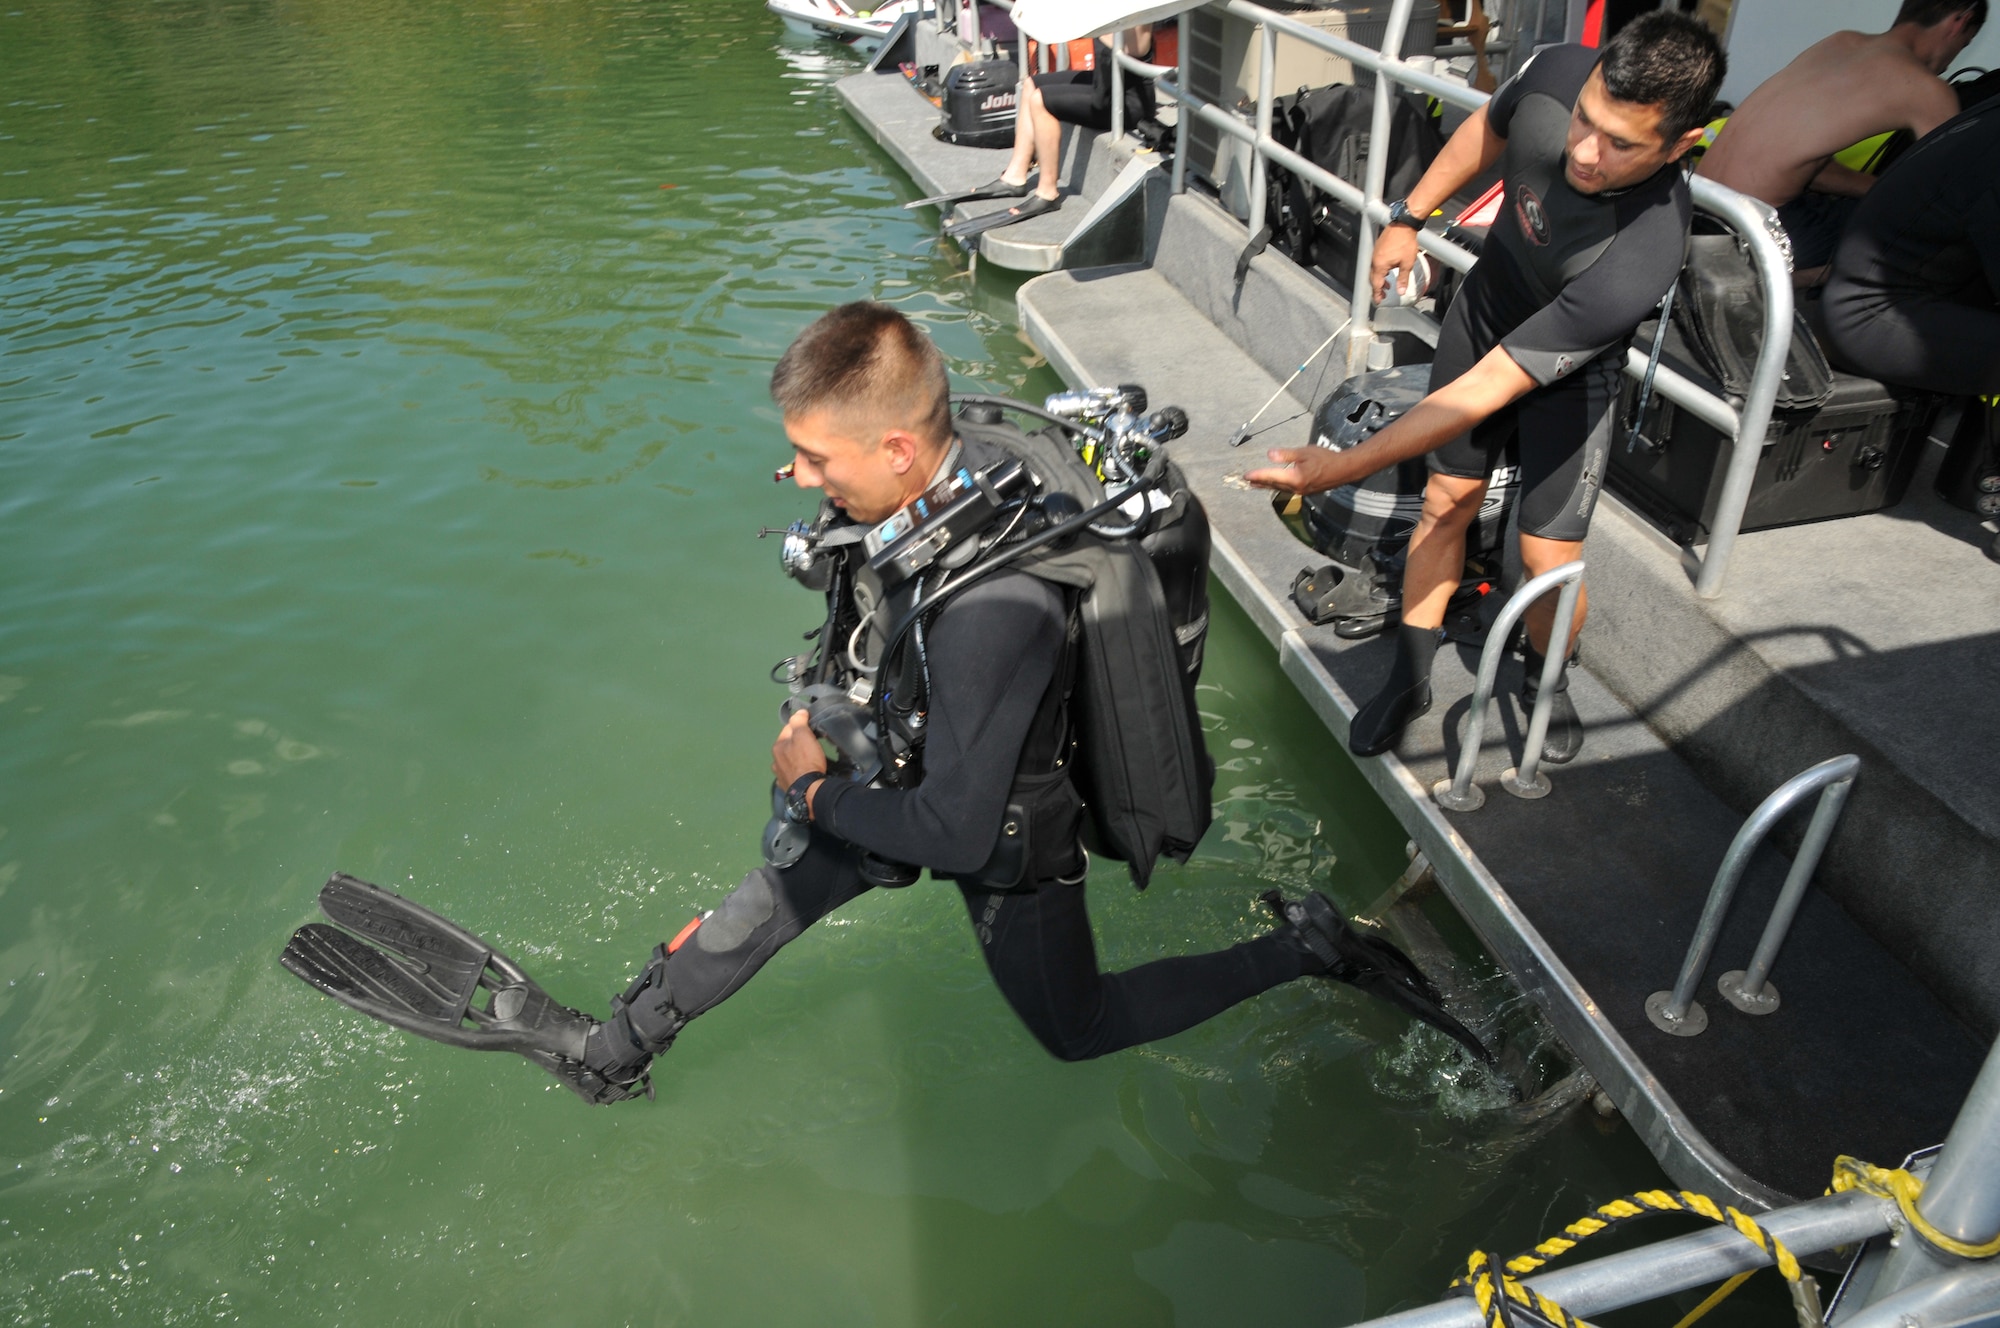 Master Sgt. Mario Romero, pararescueman for the Kentucky Air National Guard123d Special Tactics Squadron, jumps into Hollow Lake Sept. 17, 2010, during an training exchange with Ecuadorian military and civil authorities through Kentucky’s State Partnership Exchange Program. (U.S. Air Force photo by Staff Sgt. Jason Ketterer)